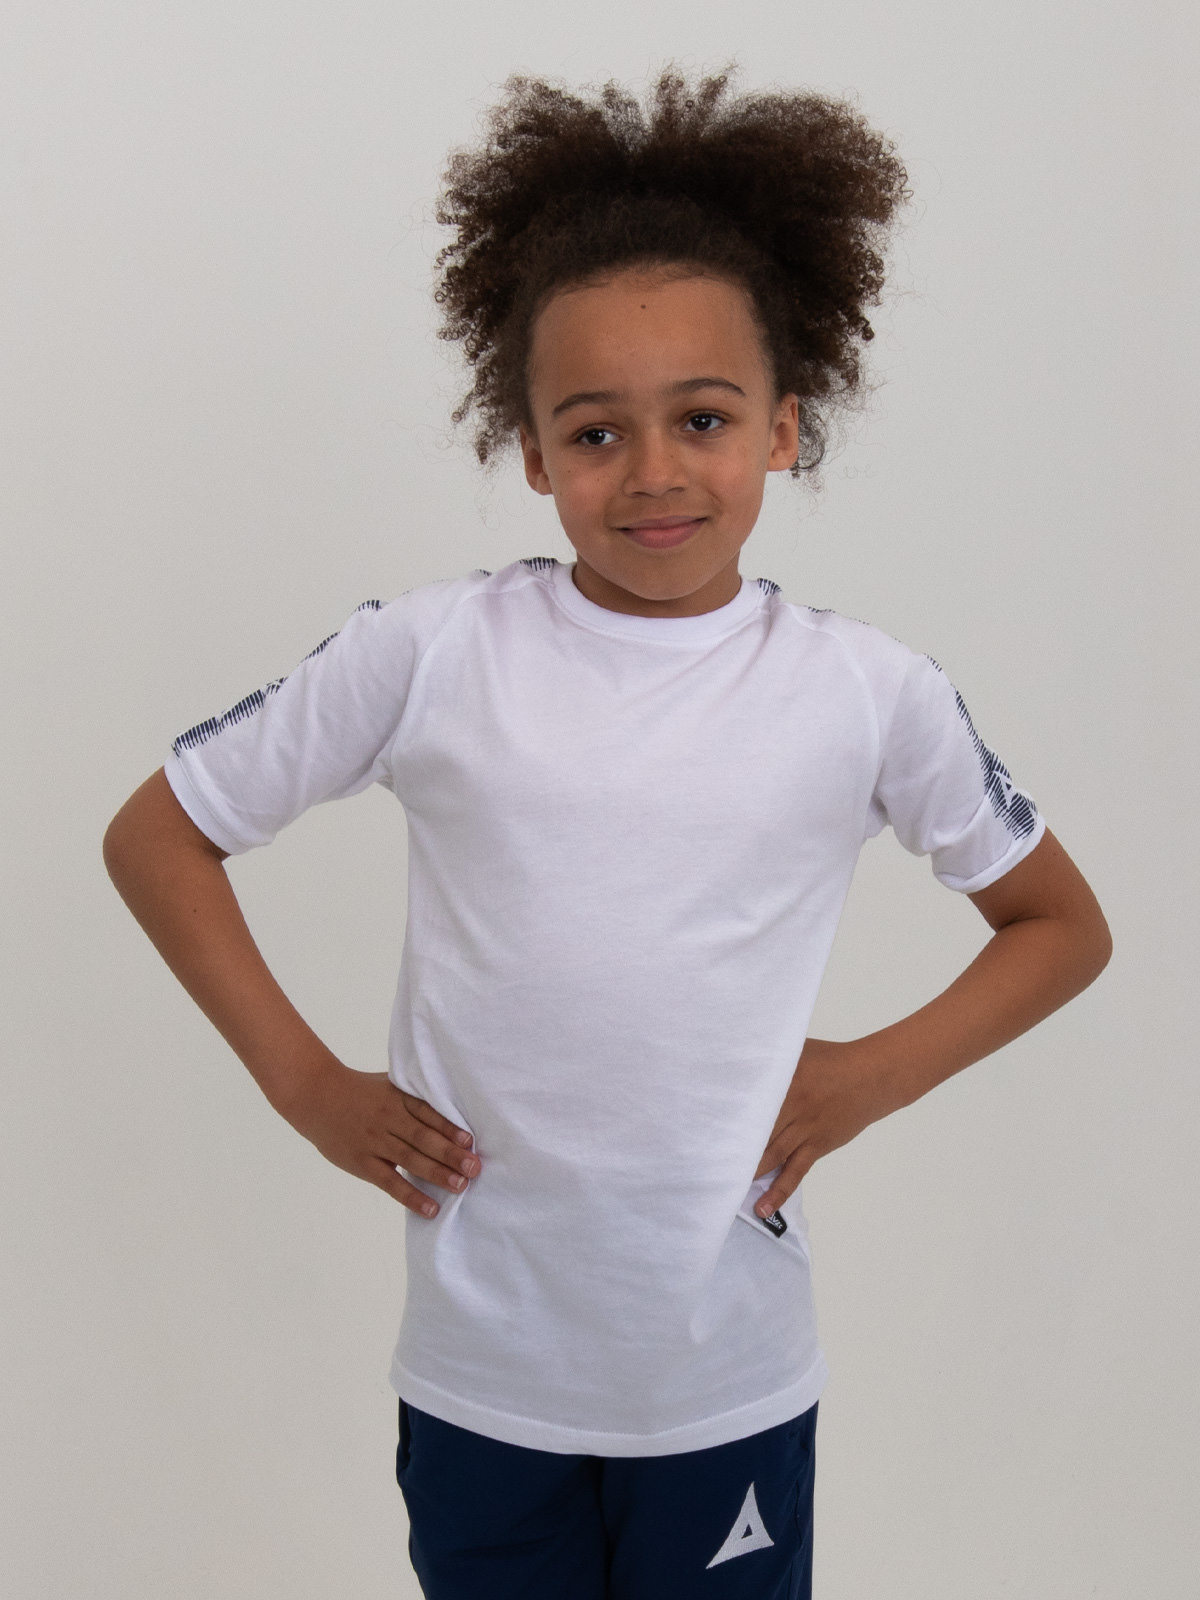 this classic kids white cotton t-shirt is being worn by a young boy